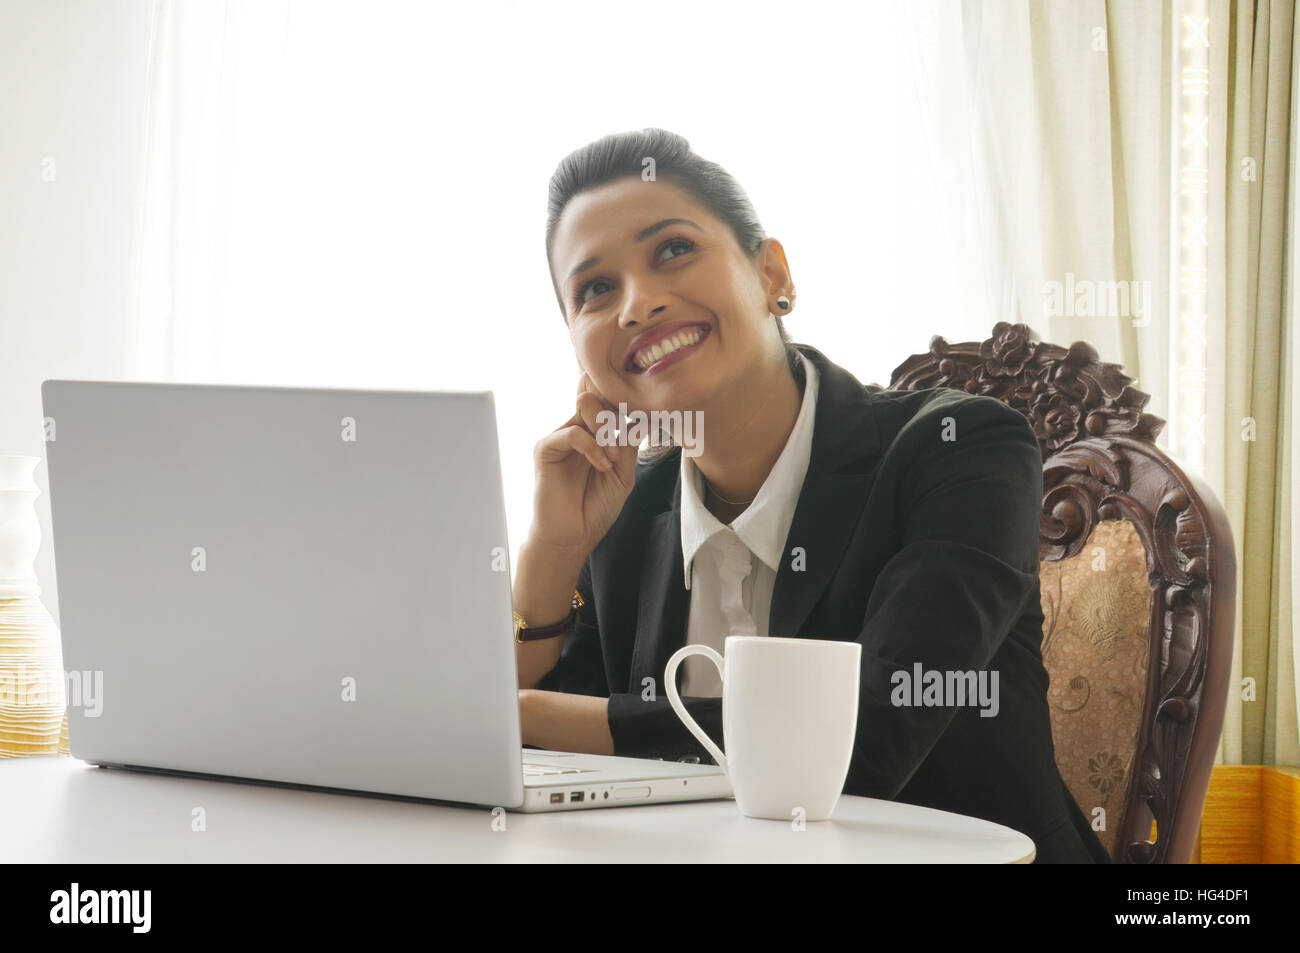 Business Woman wearing headphones and using laptop Banque D'Images